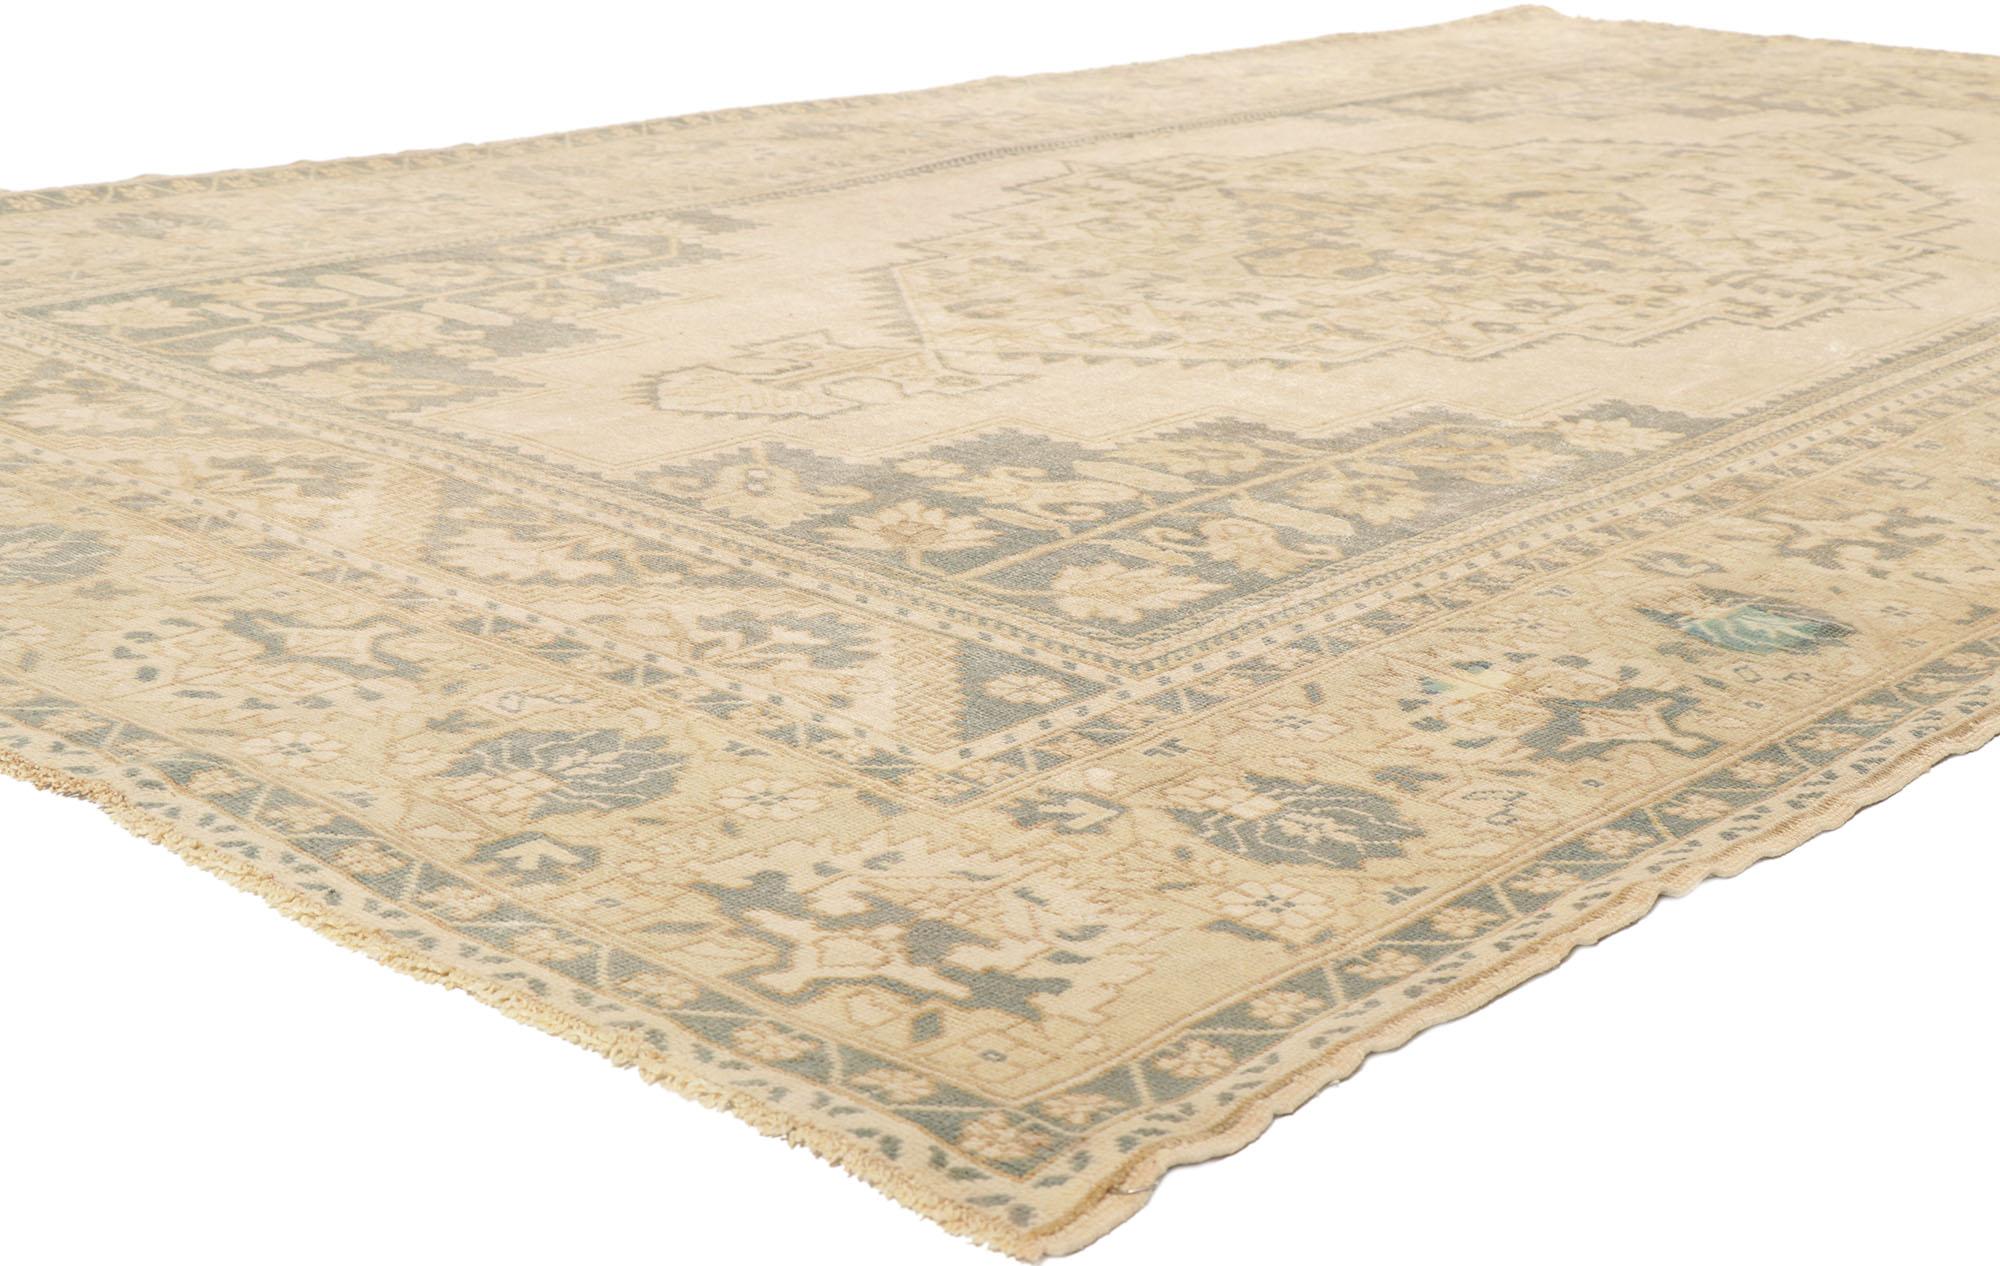 53691 Vintage Turkish Oushak Rug 7'05 x 12'10. Showcasing effortless beauty and soft, bespoke vibes, this hand knotted wool vintage Turkish Oushak rug beautifully embodies romantic cottage style. The antique washed field features a central medallion